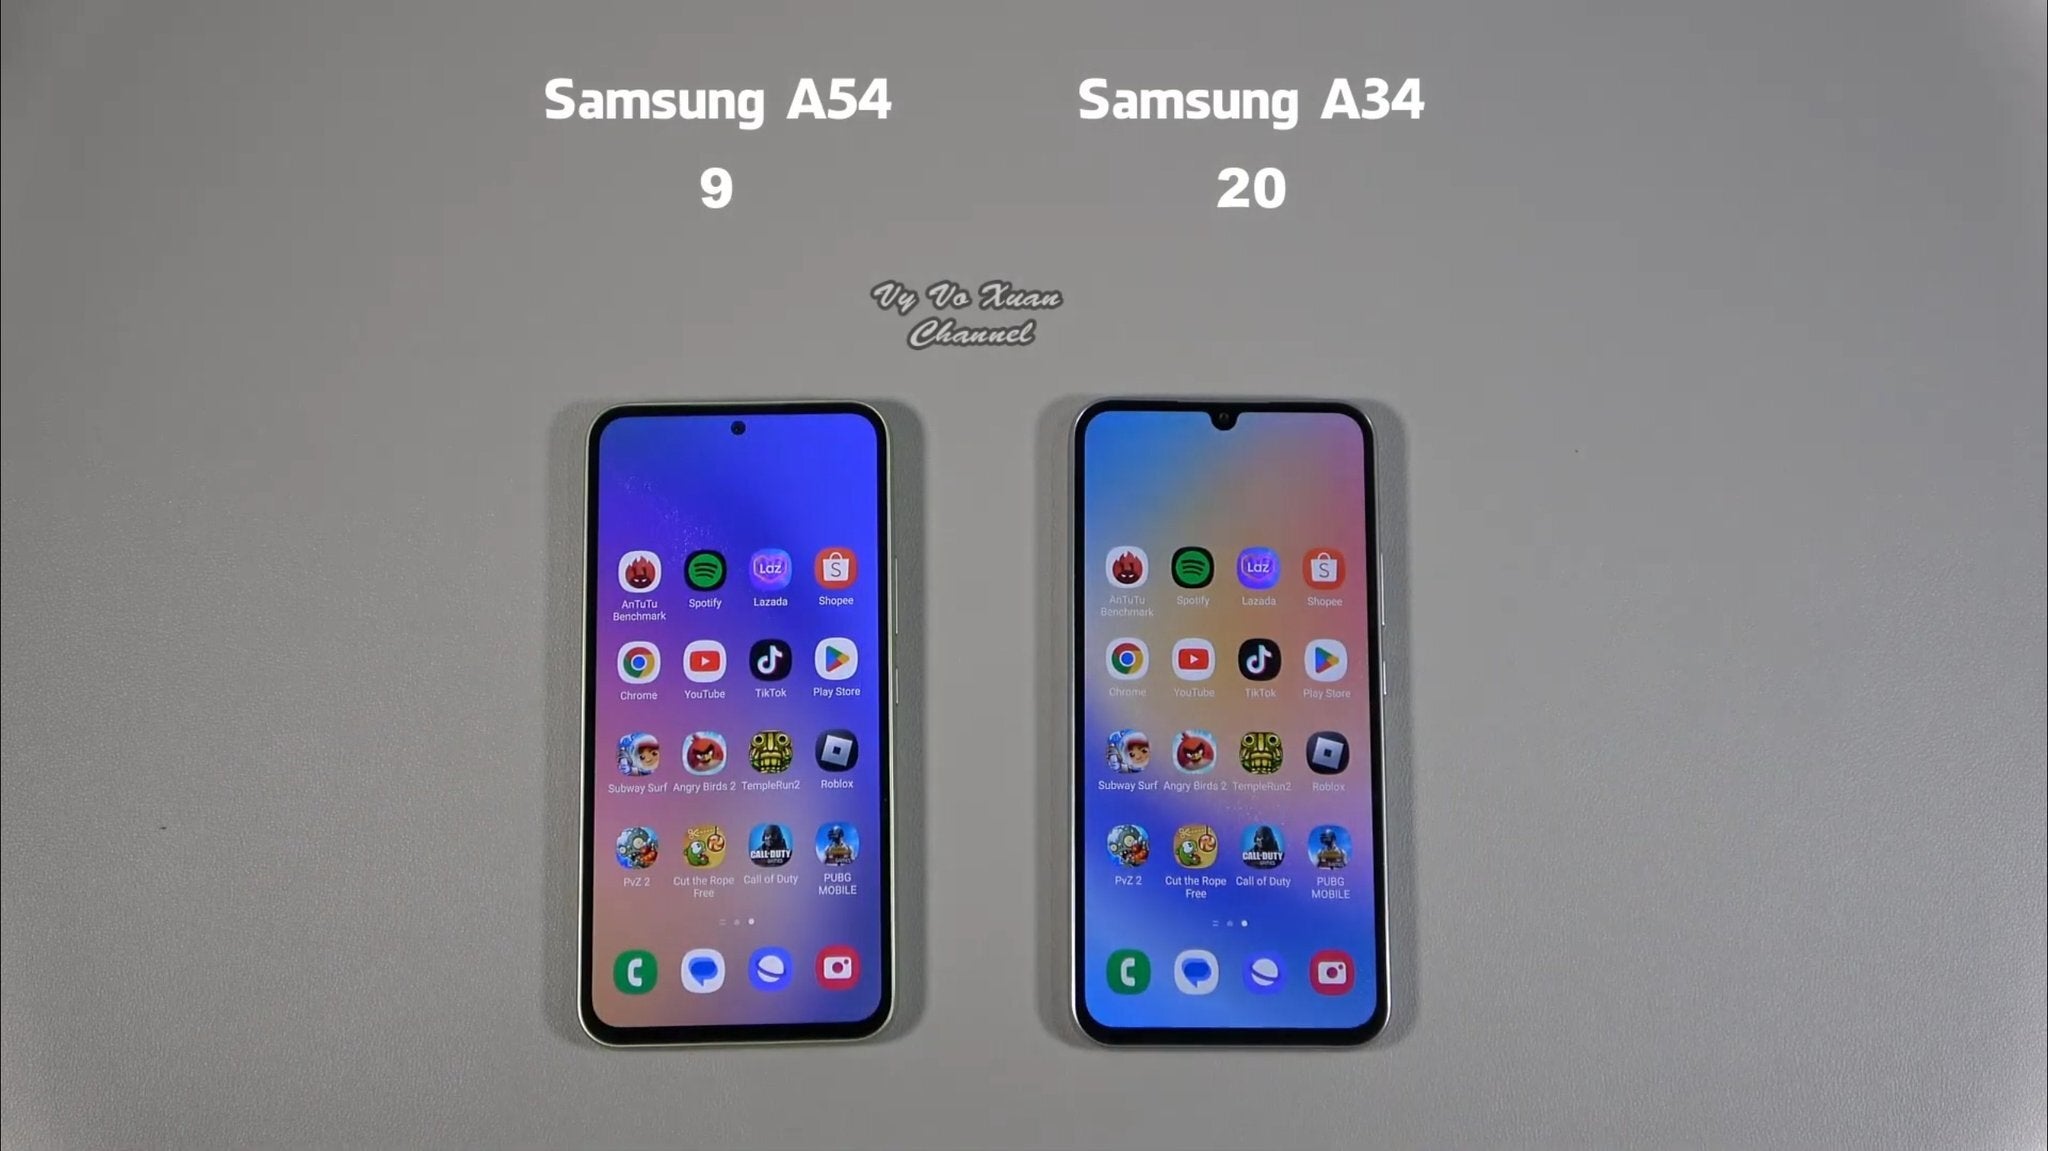 In a recent real-world speed test, the $300 Galaxy A34 was faster in opening apps than the Galaxy A54. Final score? 9-20. - Galaxy A54 - Samsung now makes cheaper phones worse to get people to spend more on Galaxy S23?